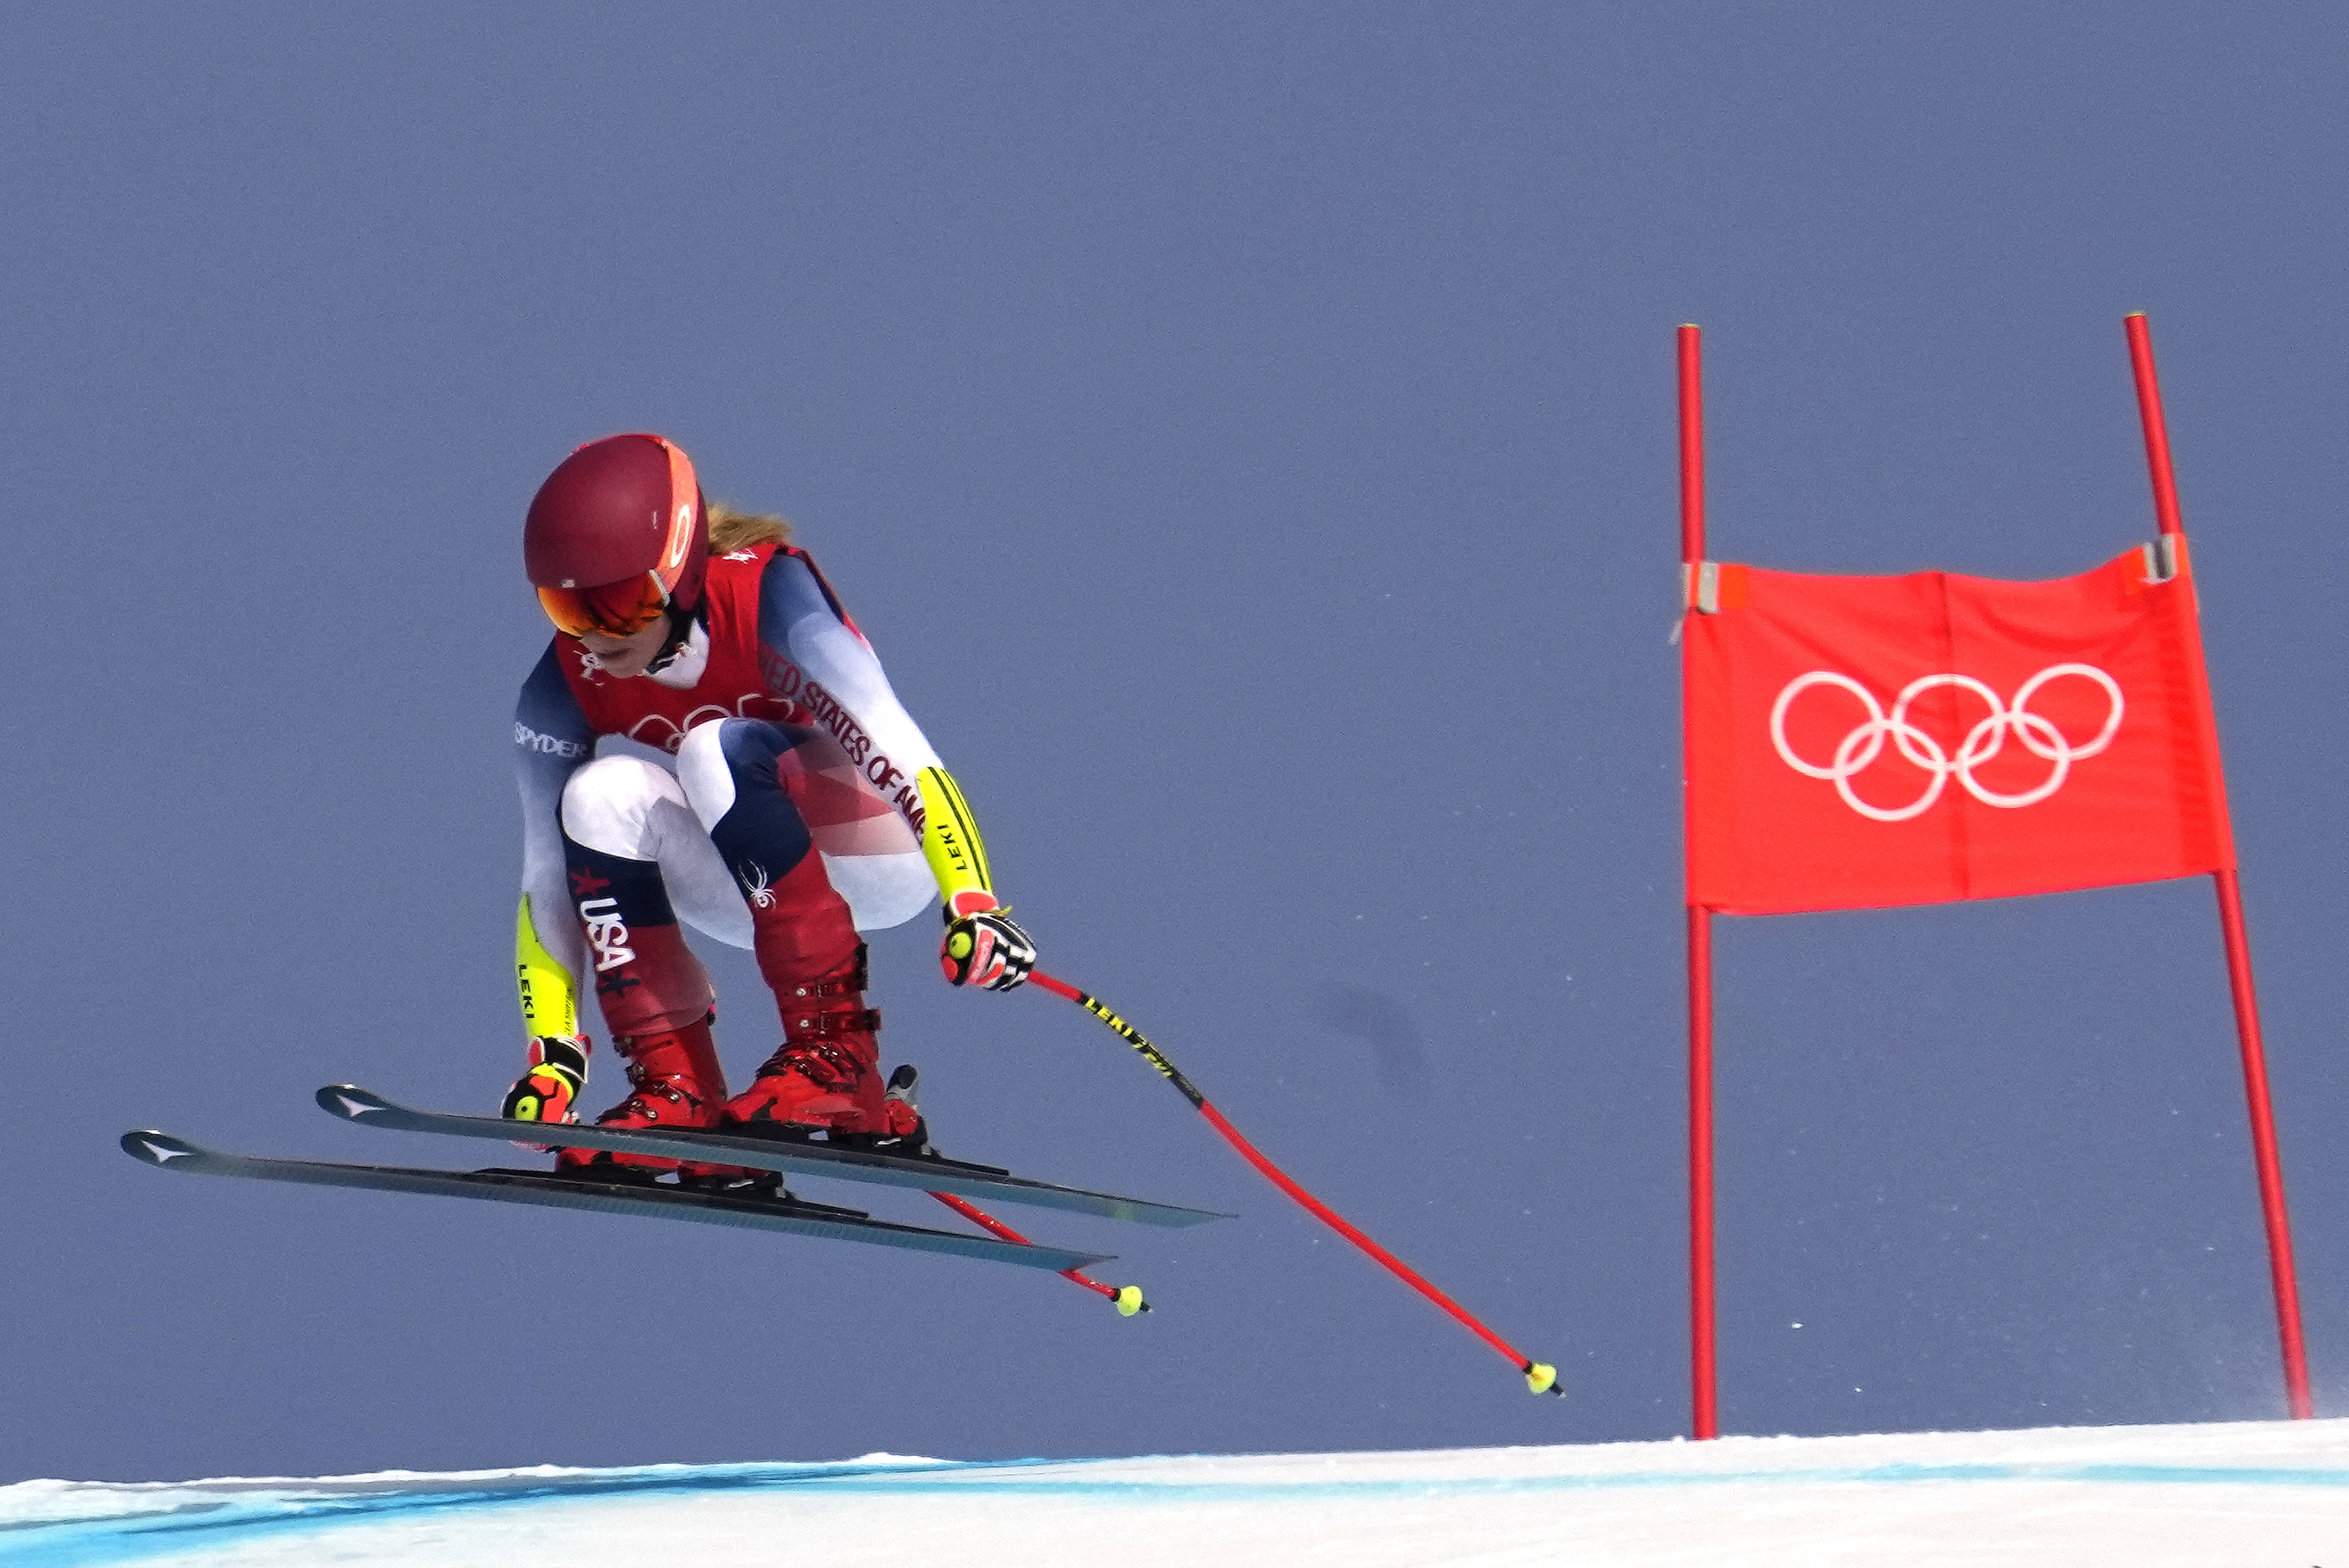 Team USA's Mikaela Shiffrin makes a jump during the alpine skiing women's super-G on Friday.